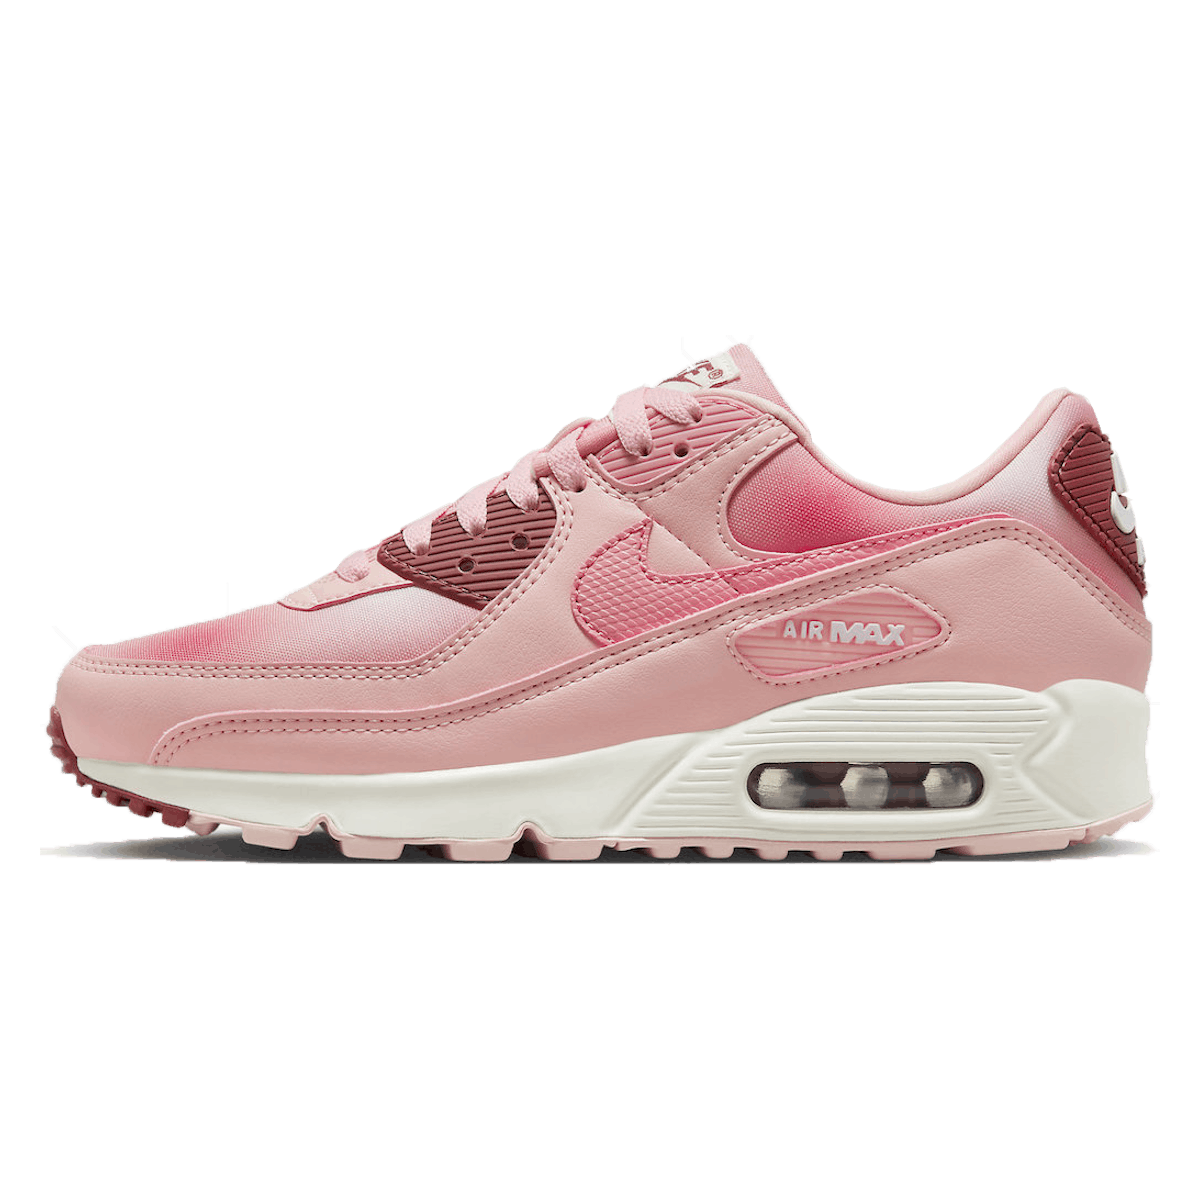 Nike Air Max 90 Wmns "Airbrushed Pink"